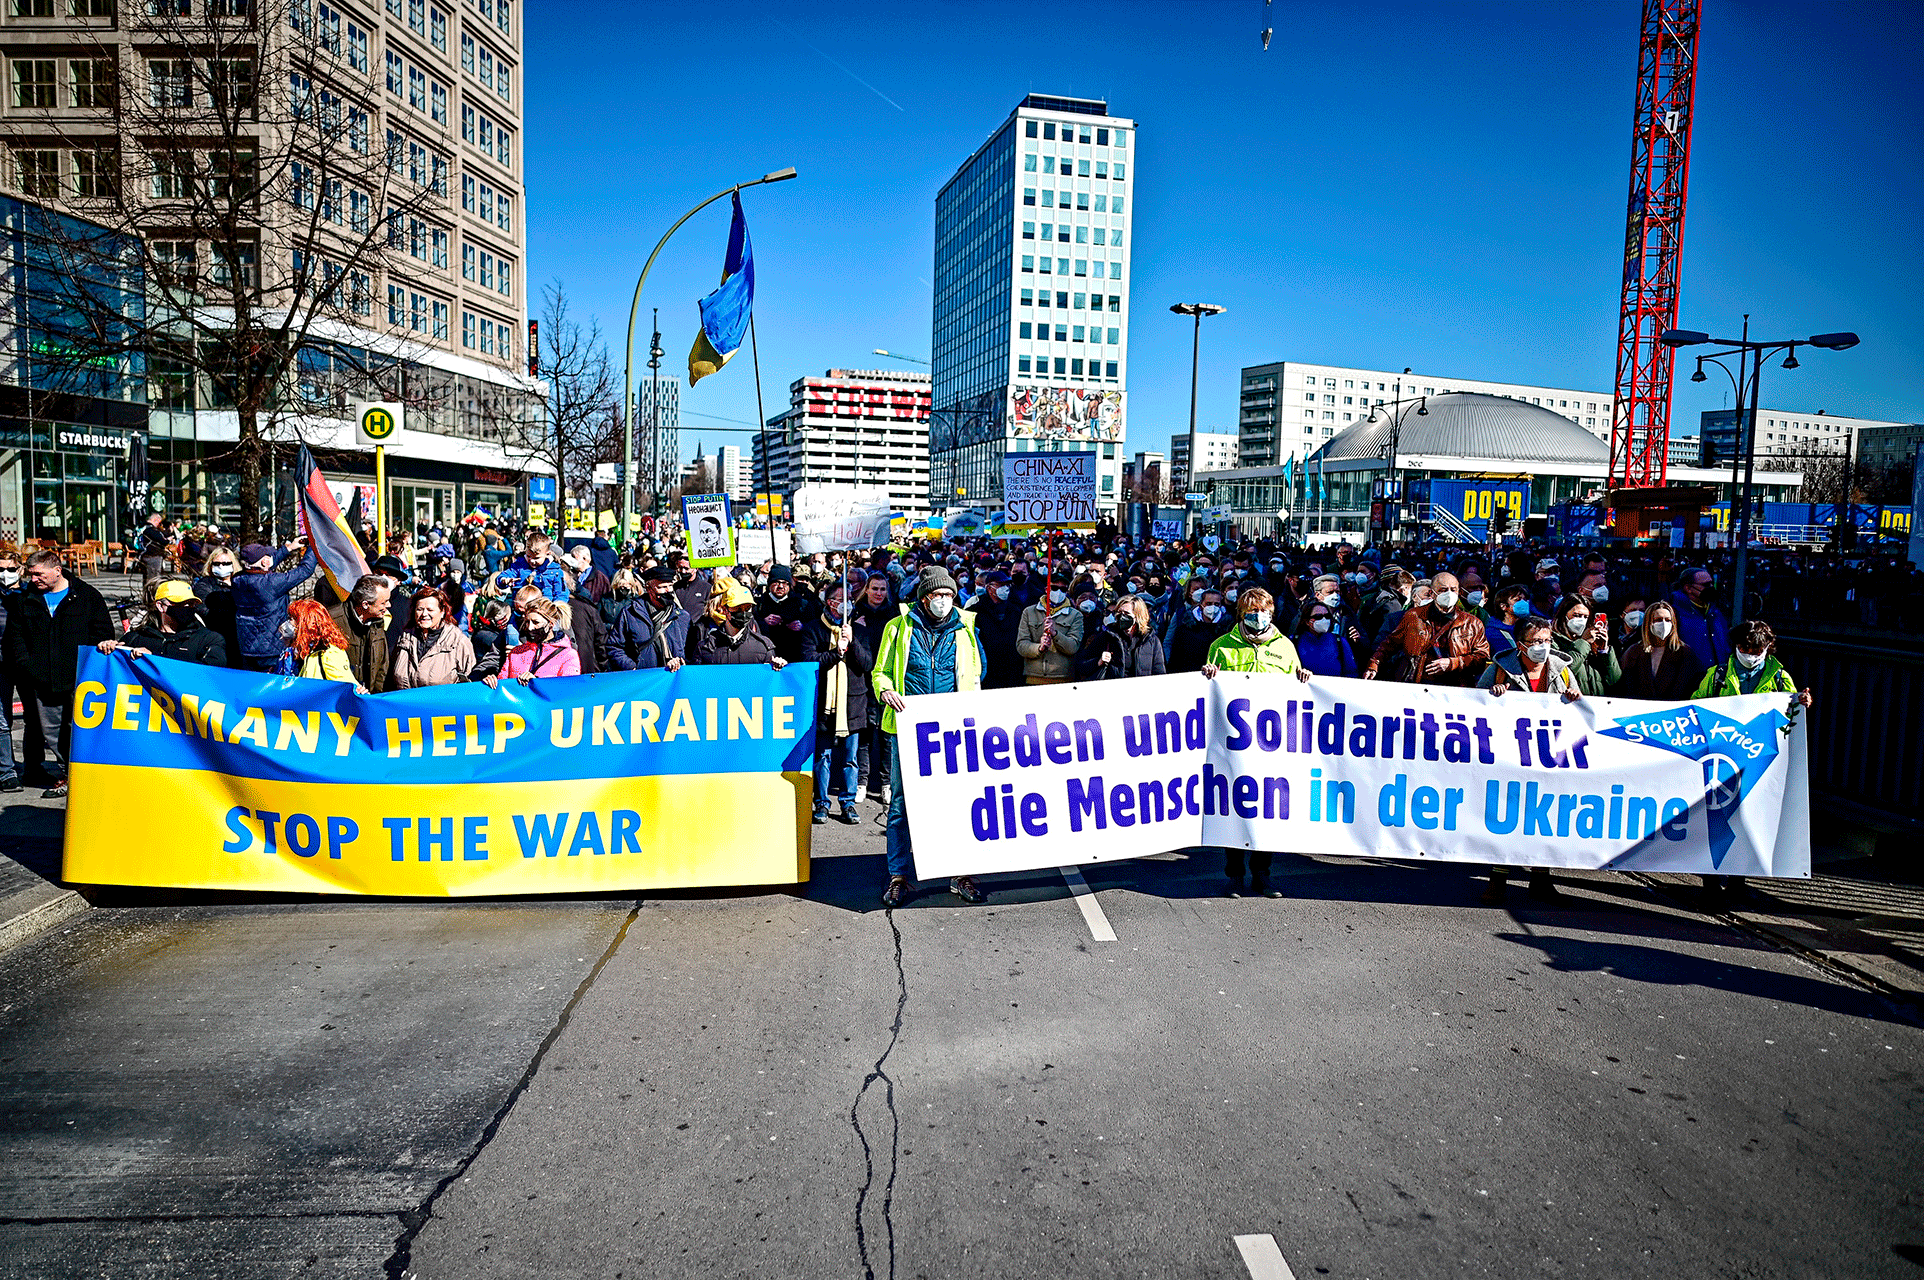 People take part in the "Stop the war! Peace and solidarity for the people in Ukraine" demonstration in Berlin, Germany, Sunday, March 13, 2022.